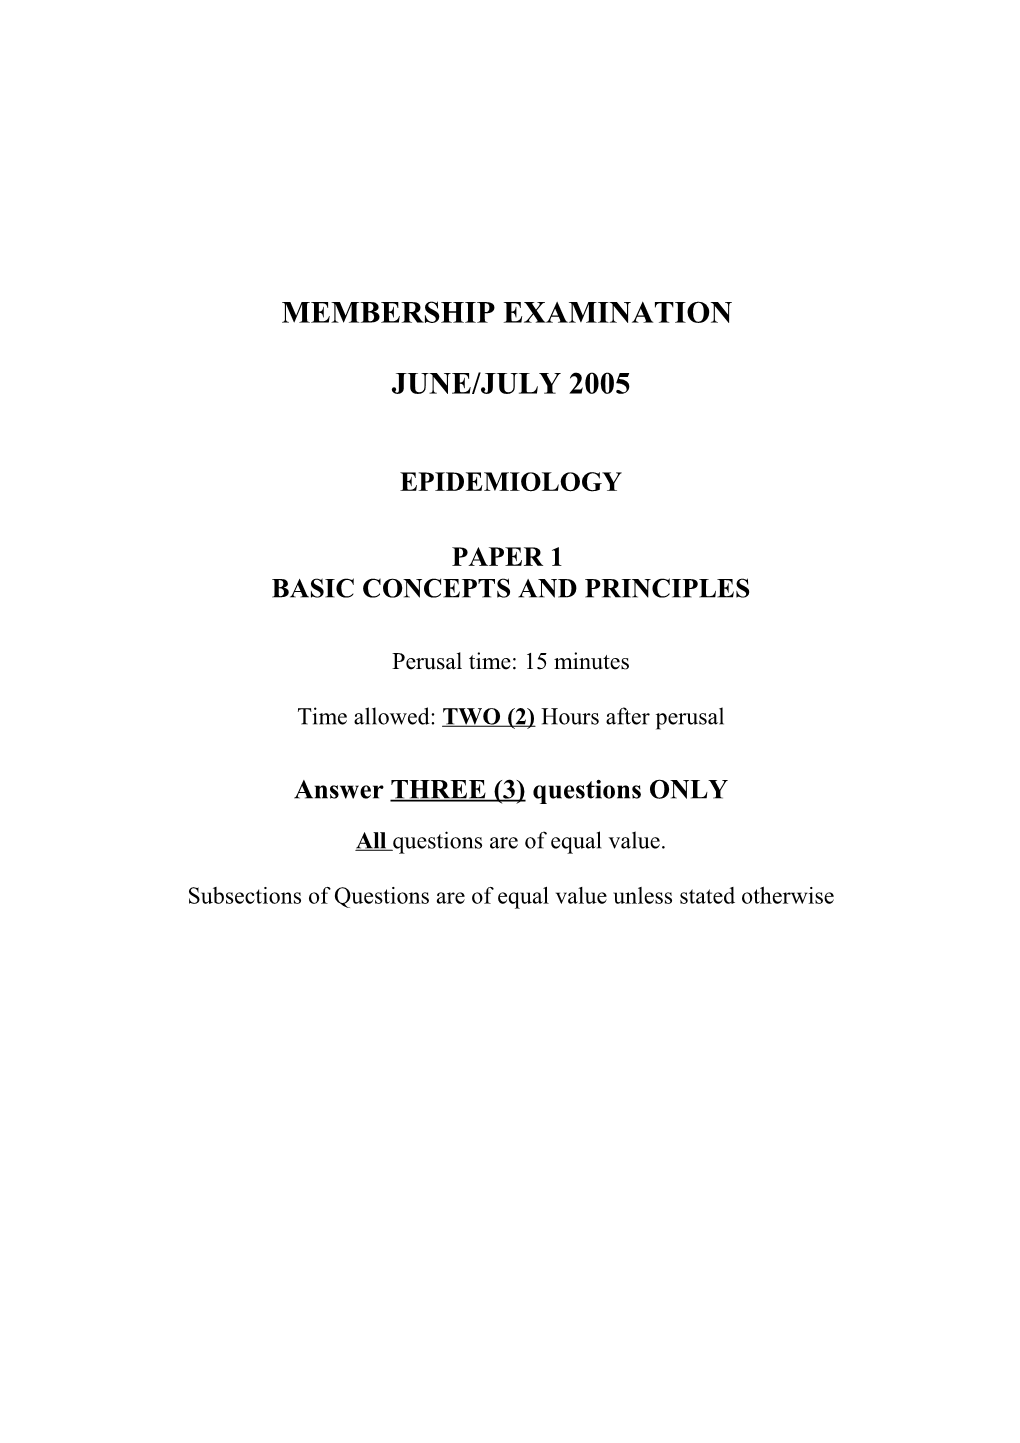 Epidemiology Exam Papers 2005